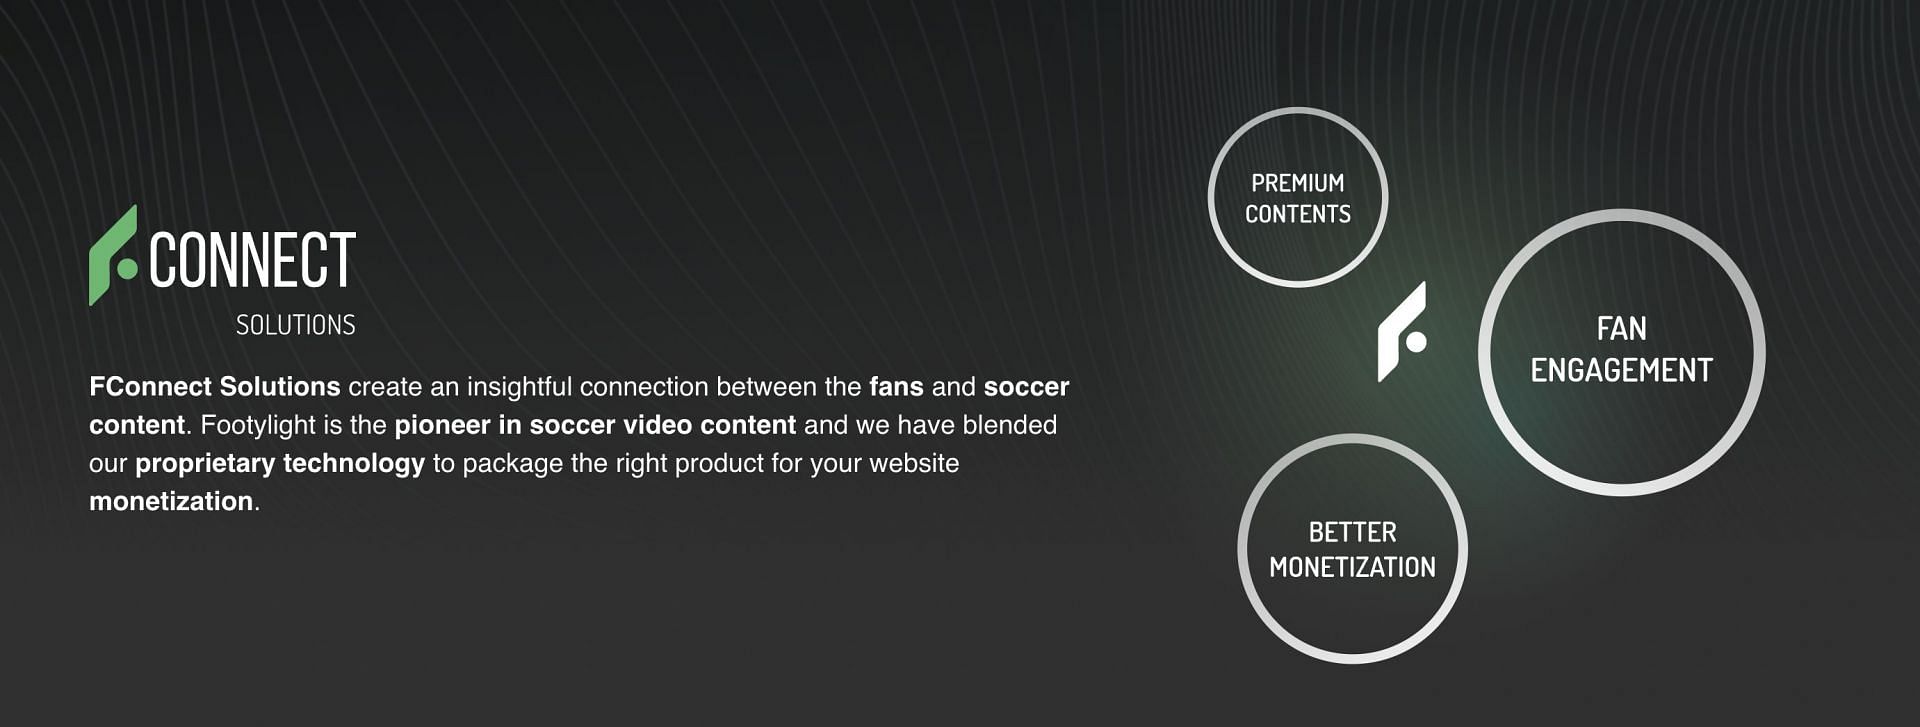 FConnect solutions offered by Footylight (Image via Footylight)